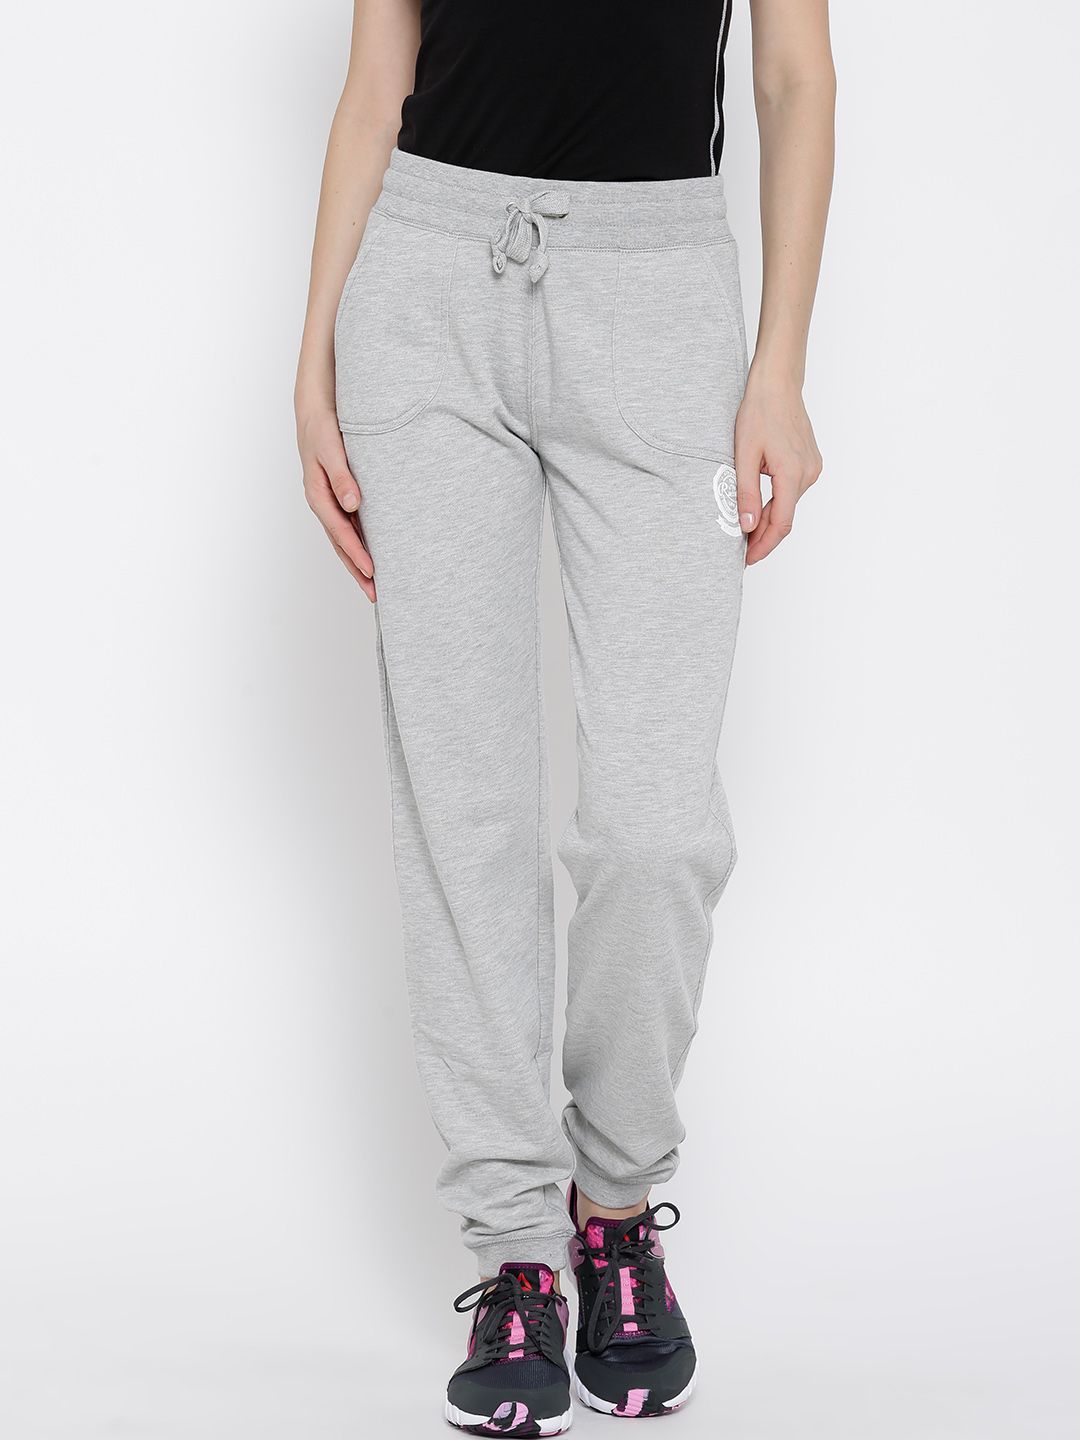 Russell Athletic Grey Melange Track Pants Price in India